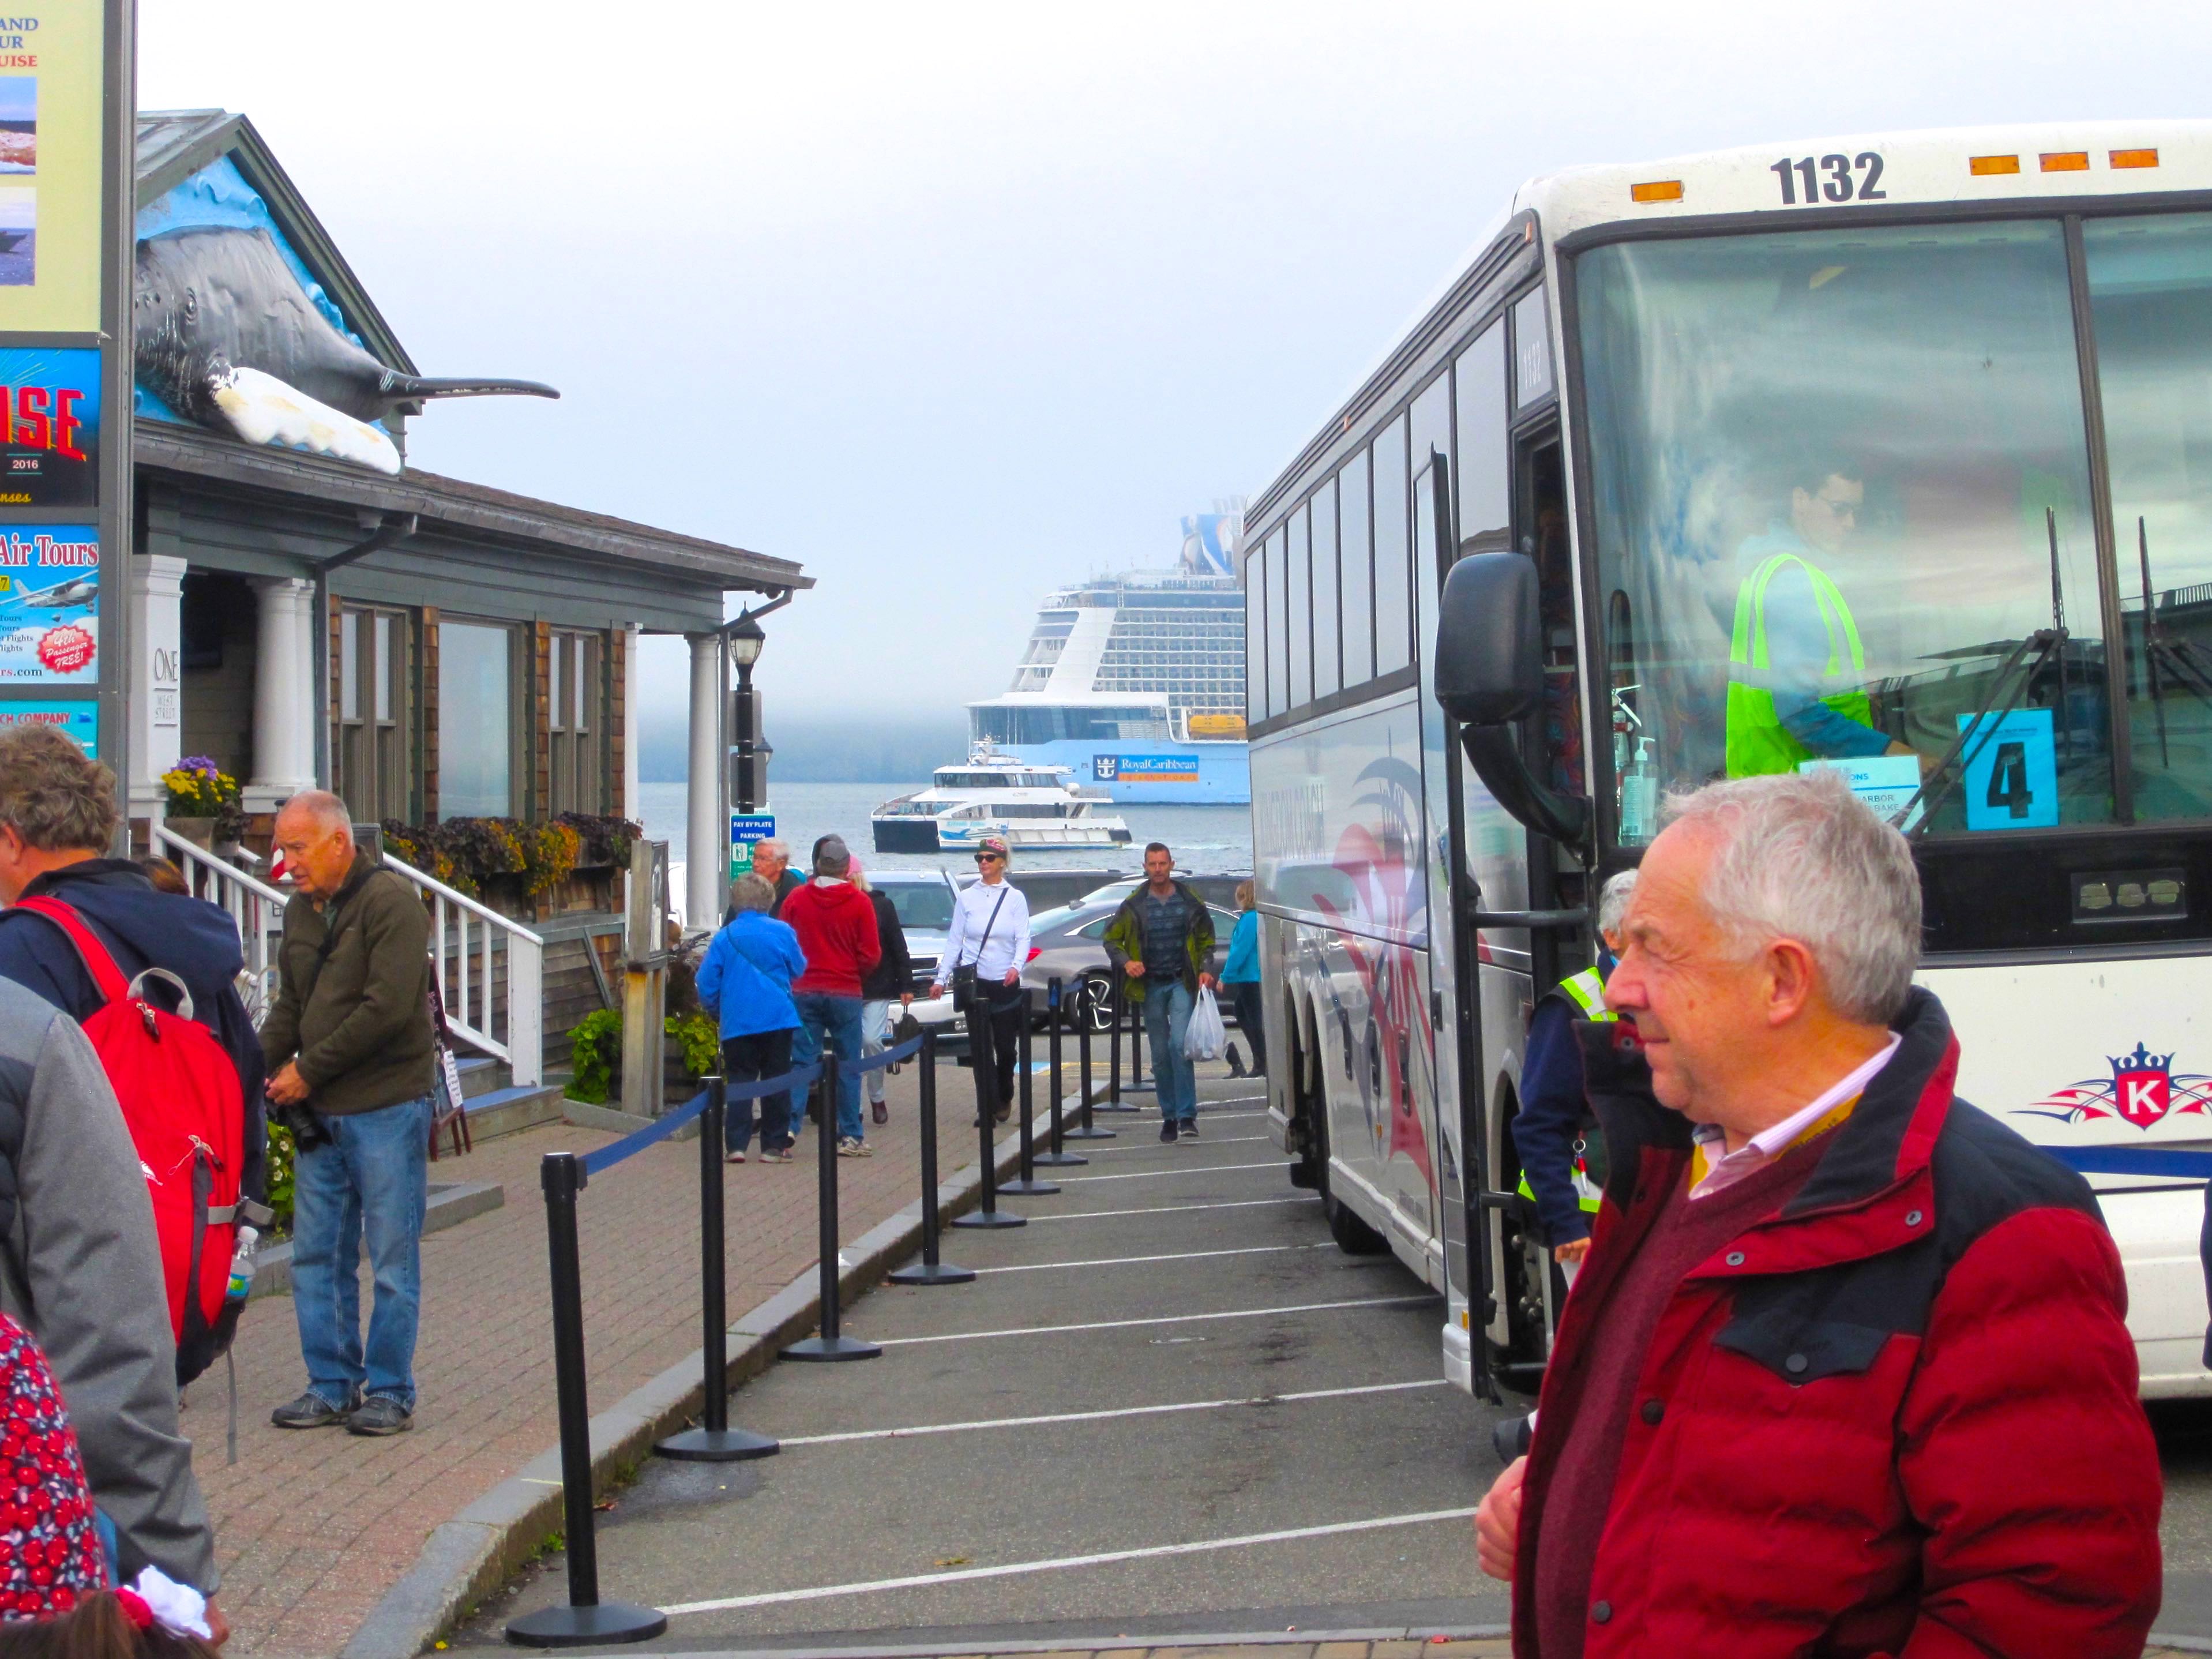 bar harbor cruise restrictions